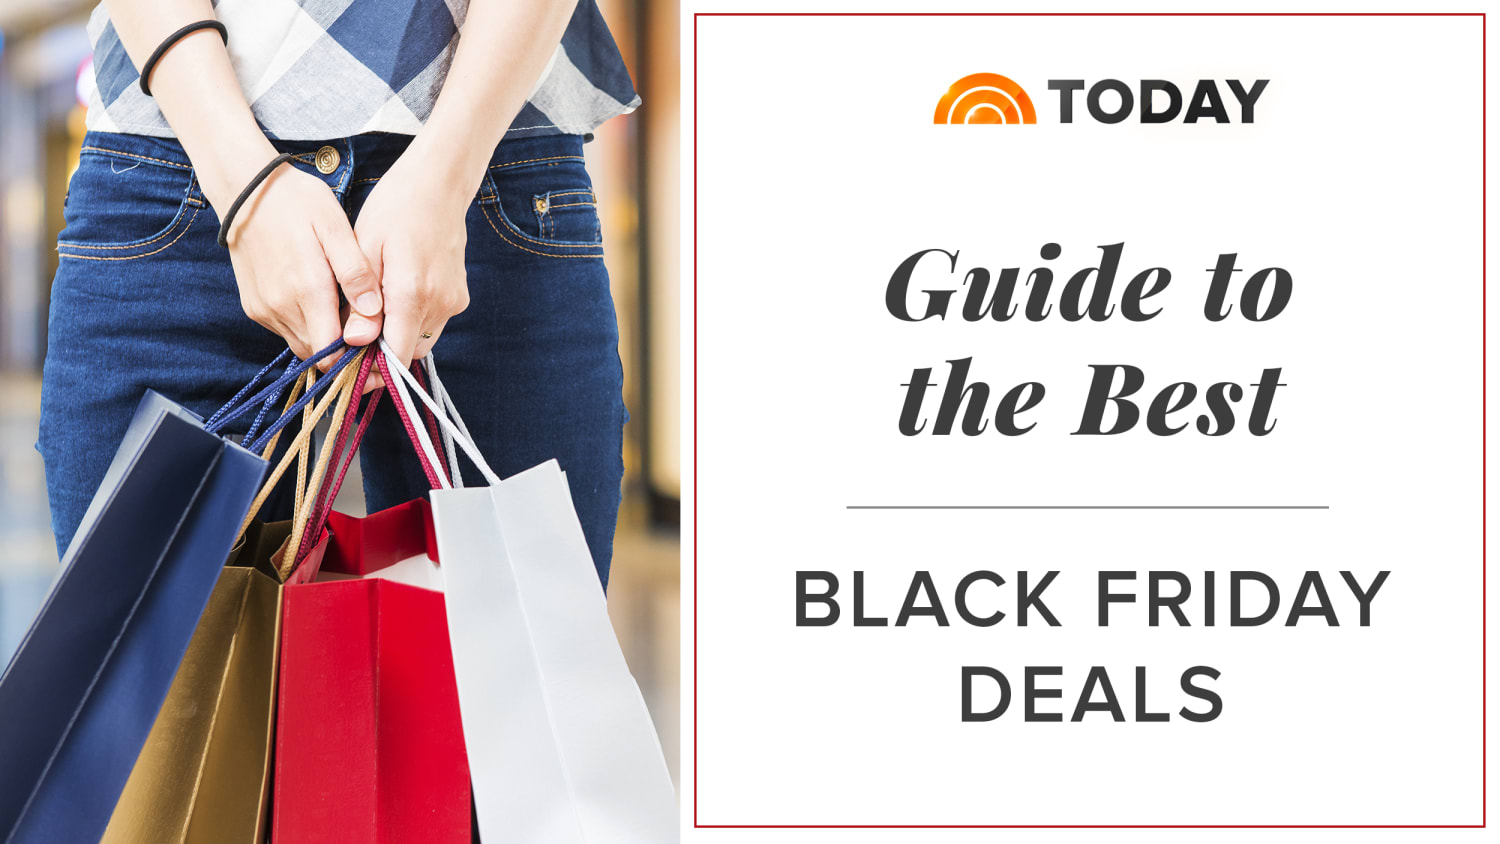 Best Black Friday Deals on Amazon, Target and more 2017 - TODAY.com - What Time Can You Shop Online For Black Friday Target